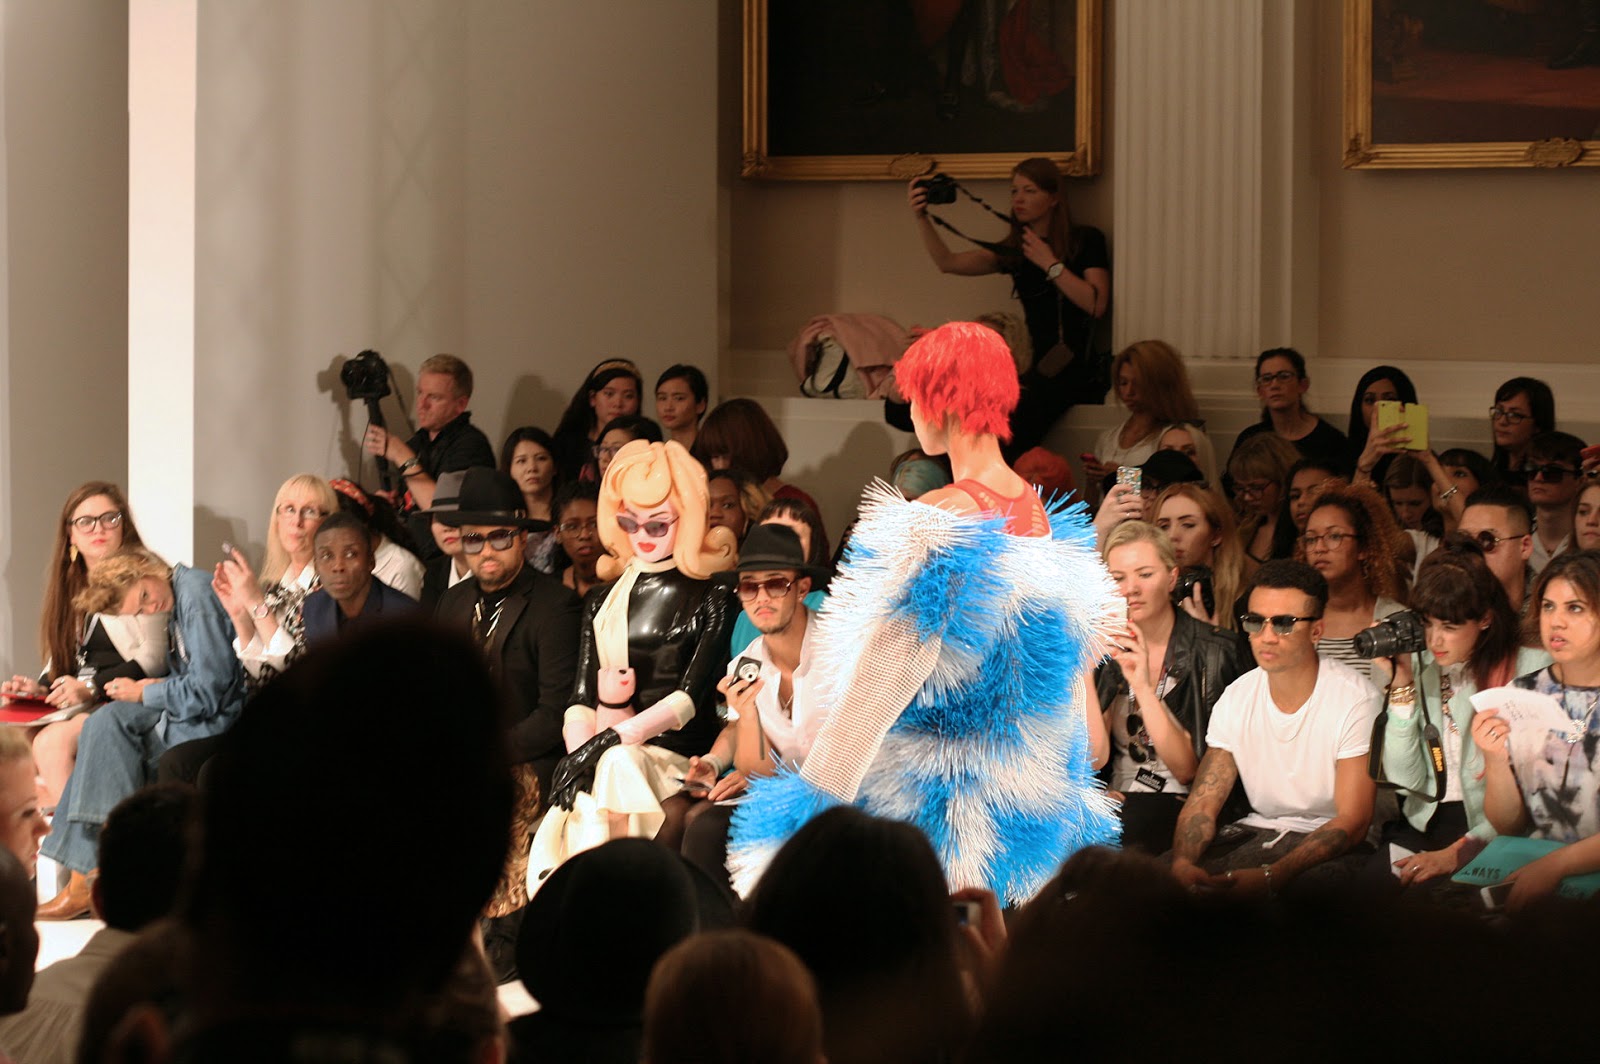 LFW Fashion Scout Highlights